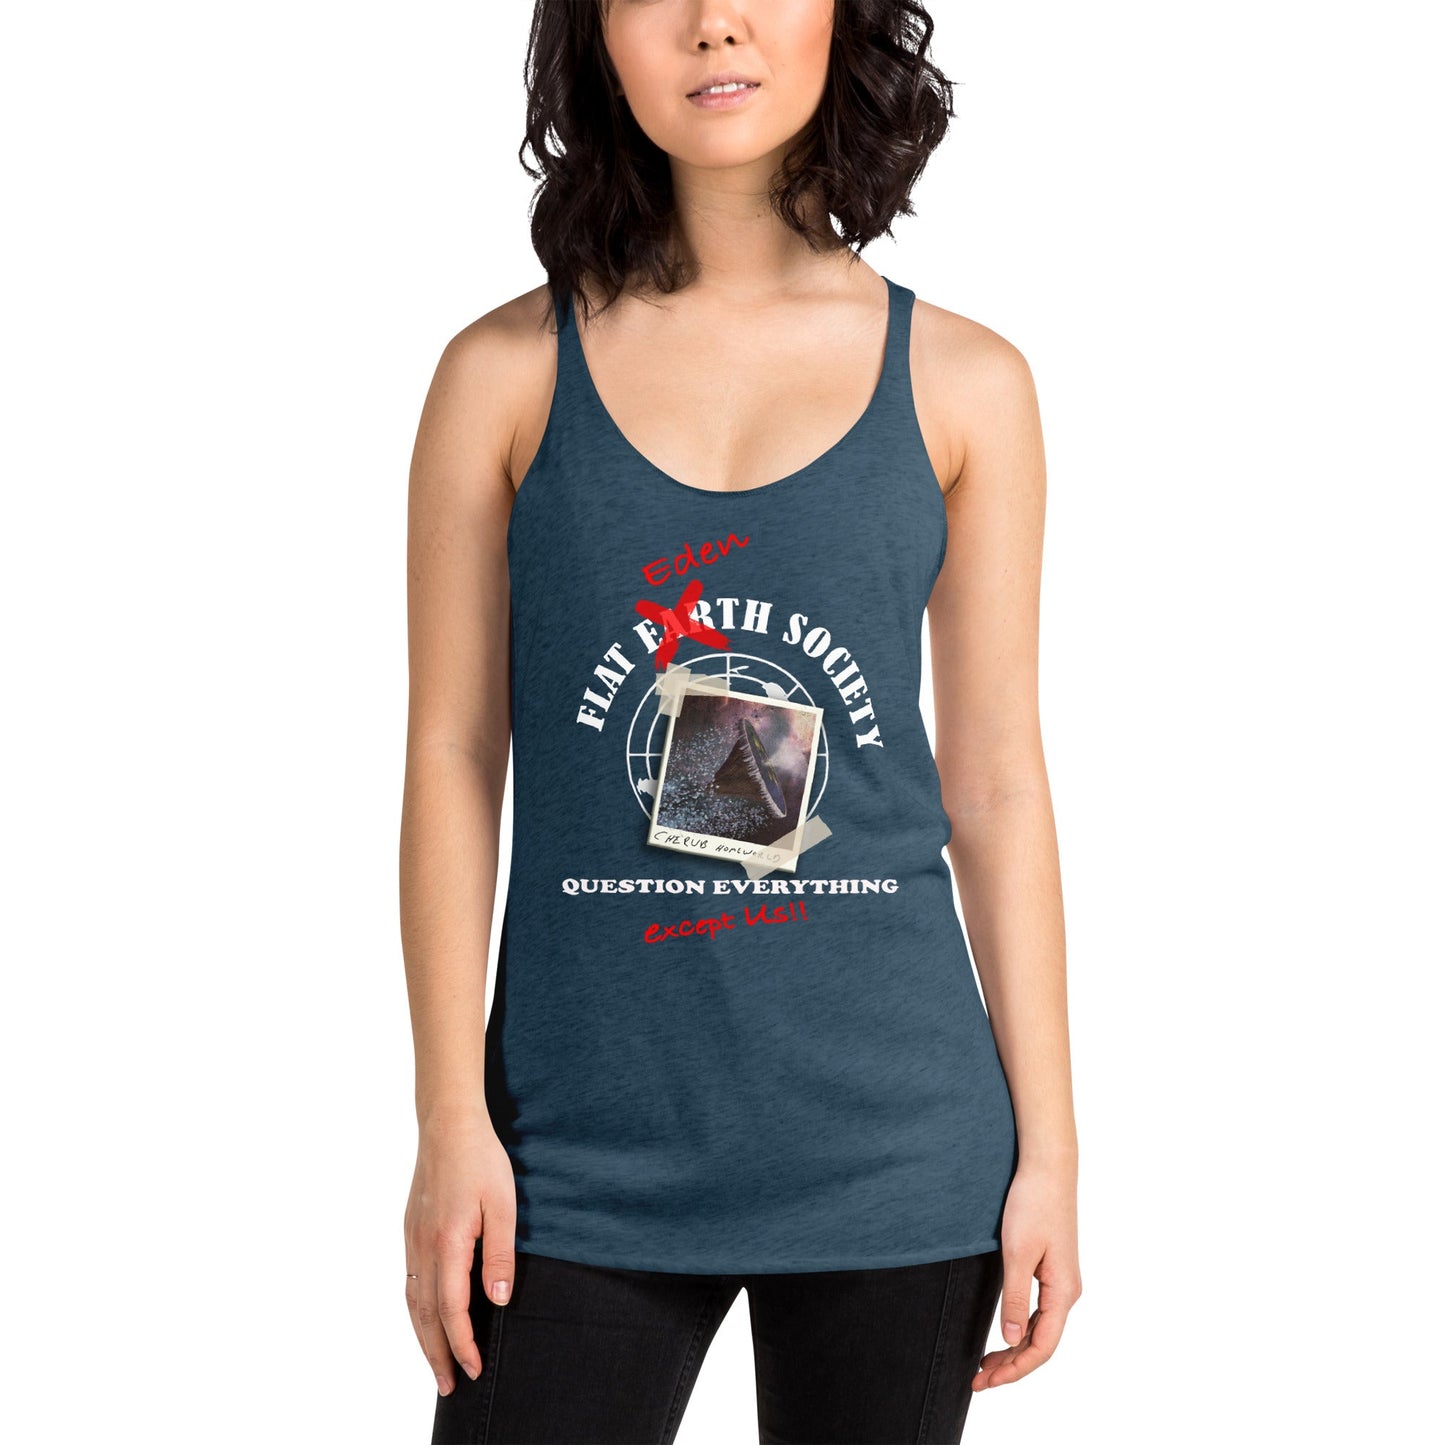 Women's Racerback Tank | Intergalactic Space Force 2 | Flat Eden Society - Spectral Ink Shop - Shirts & Tops -2753985_6626